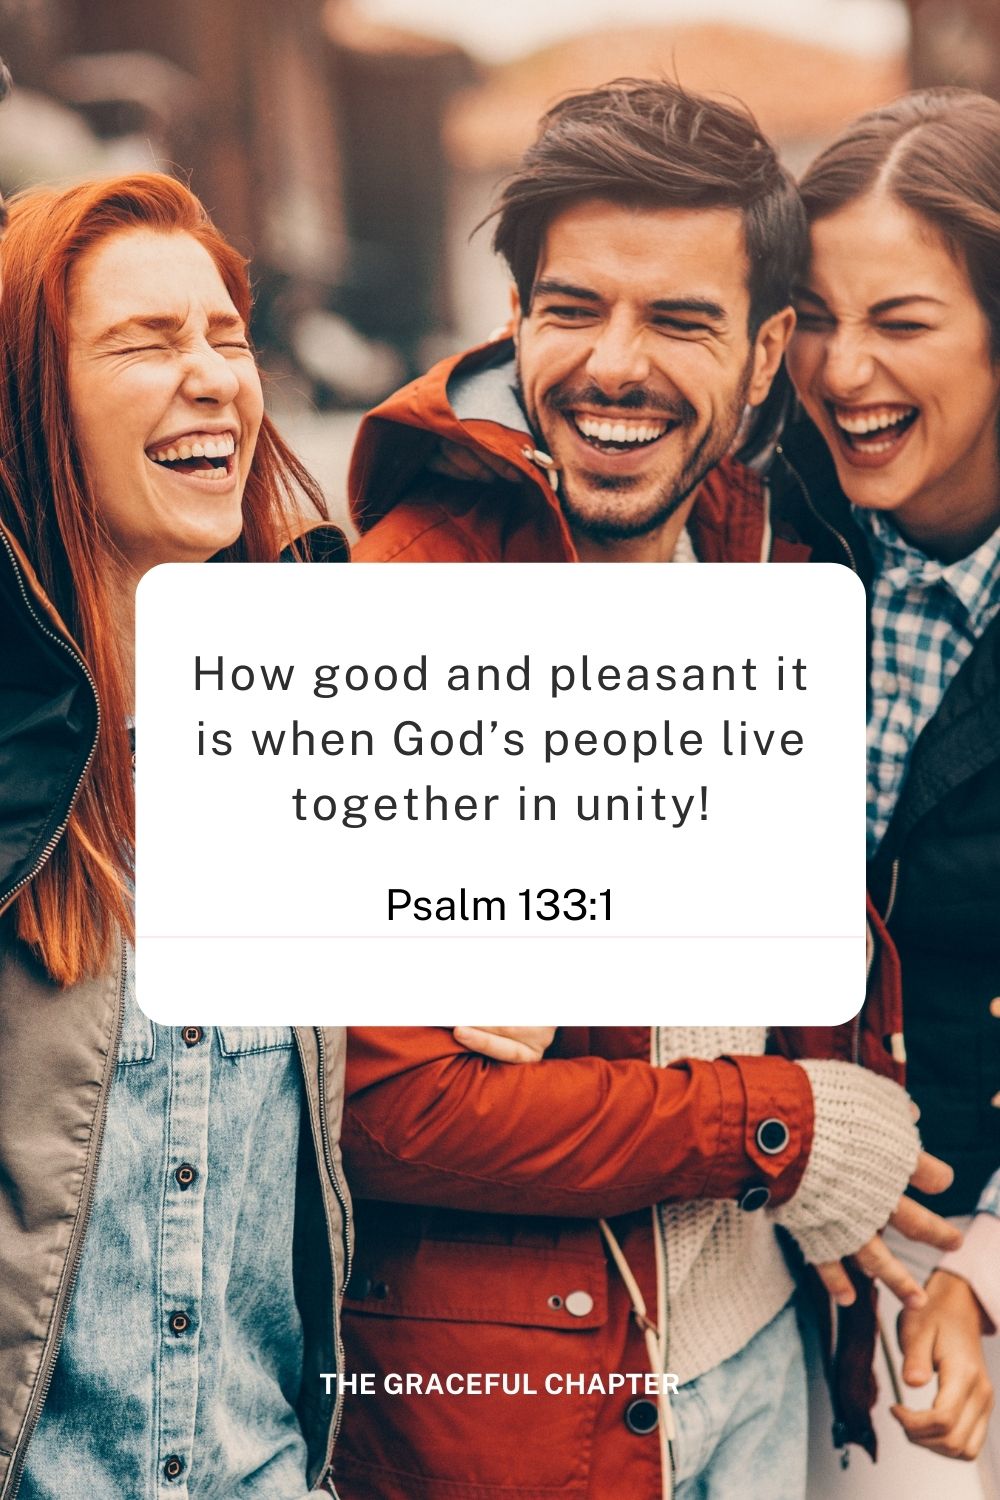 How good and pleasant it is when God’s people live together in unity!
Psalm 133:1